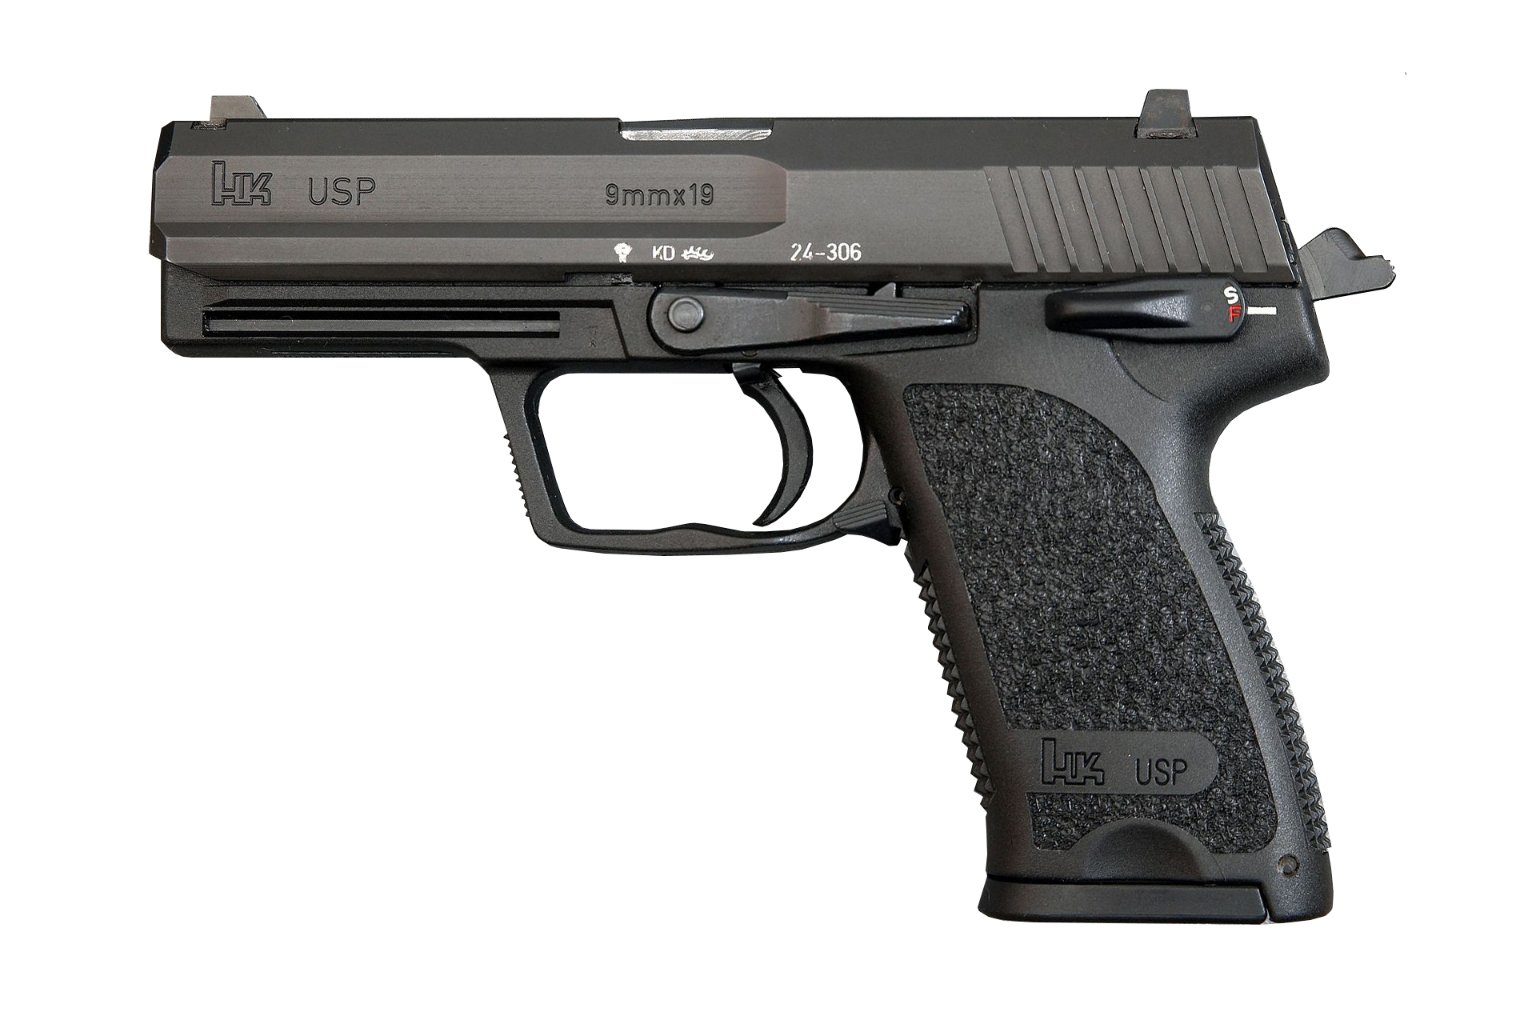 The HK Universal Service Pistol: Just How Good Is This Gun? | The